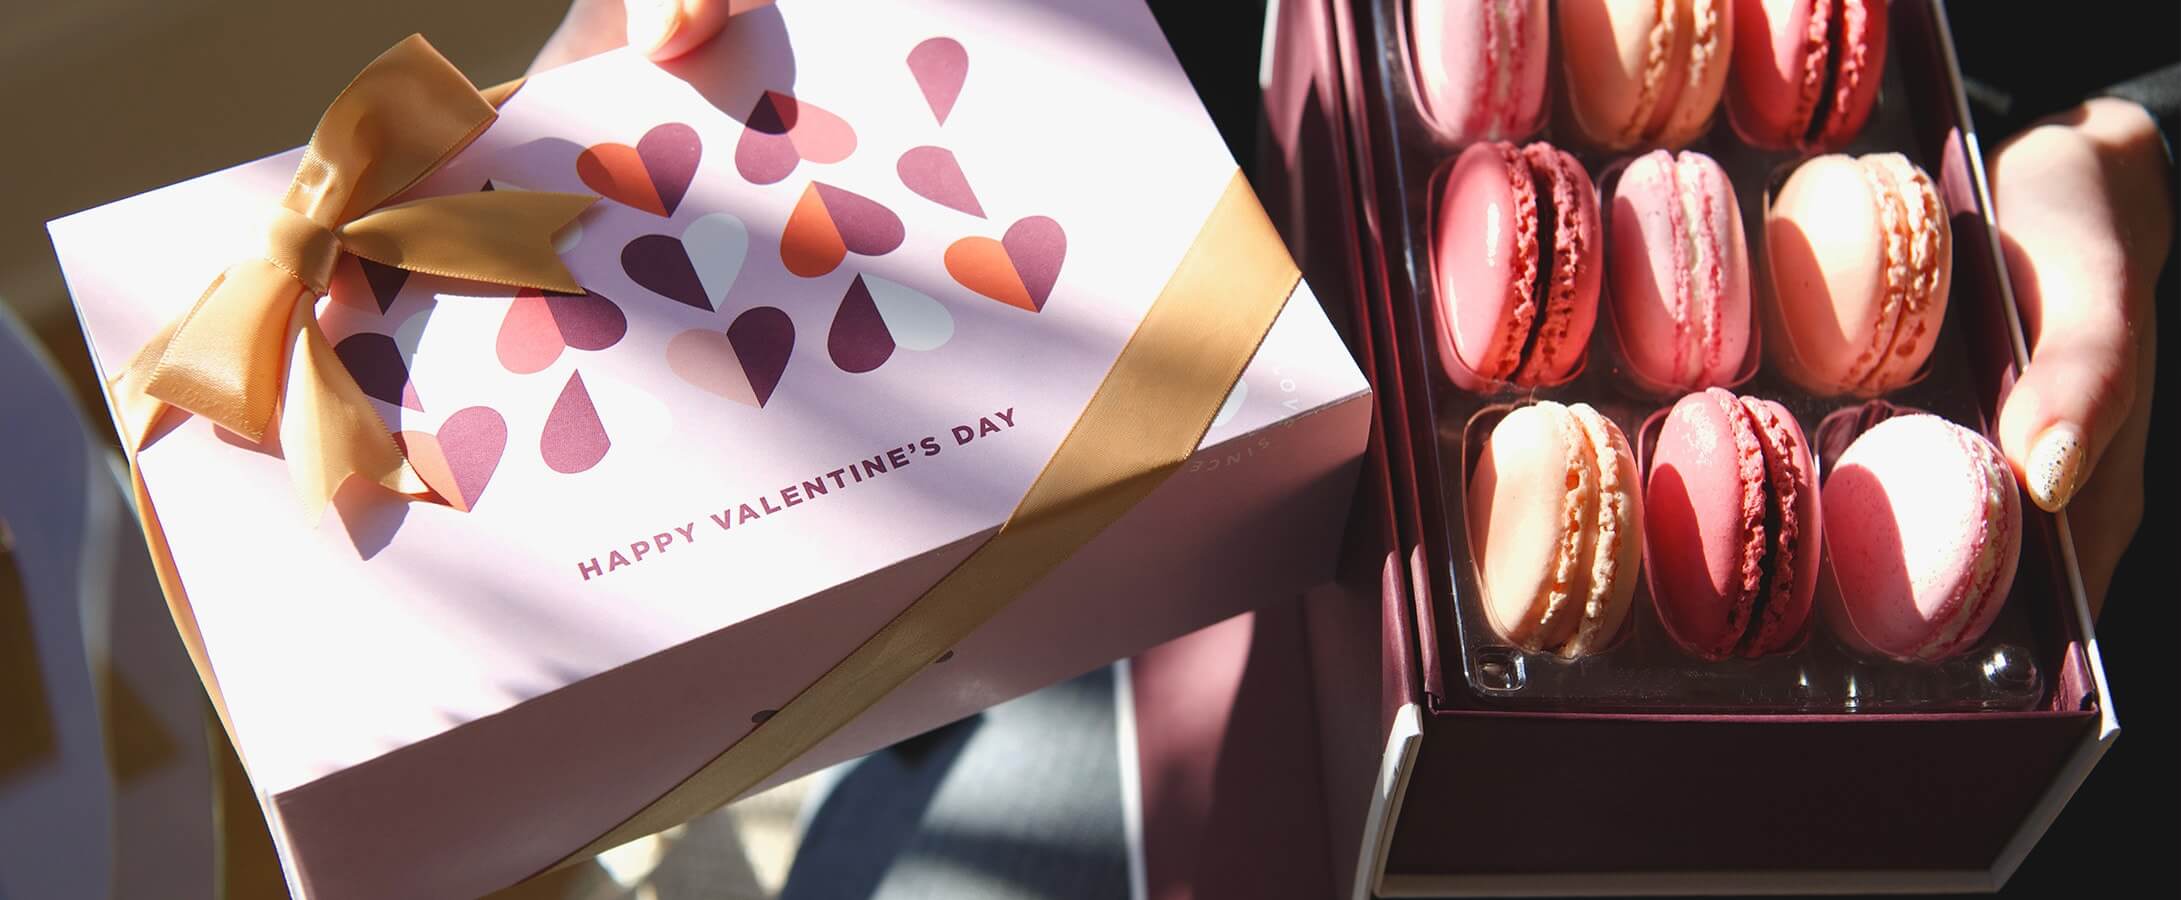 A box full of macarons and a macaron box with a Valentine’s Day sleeve are being held by female hands.